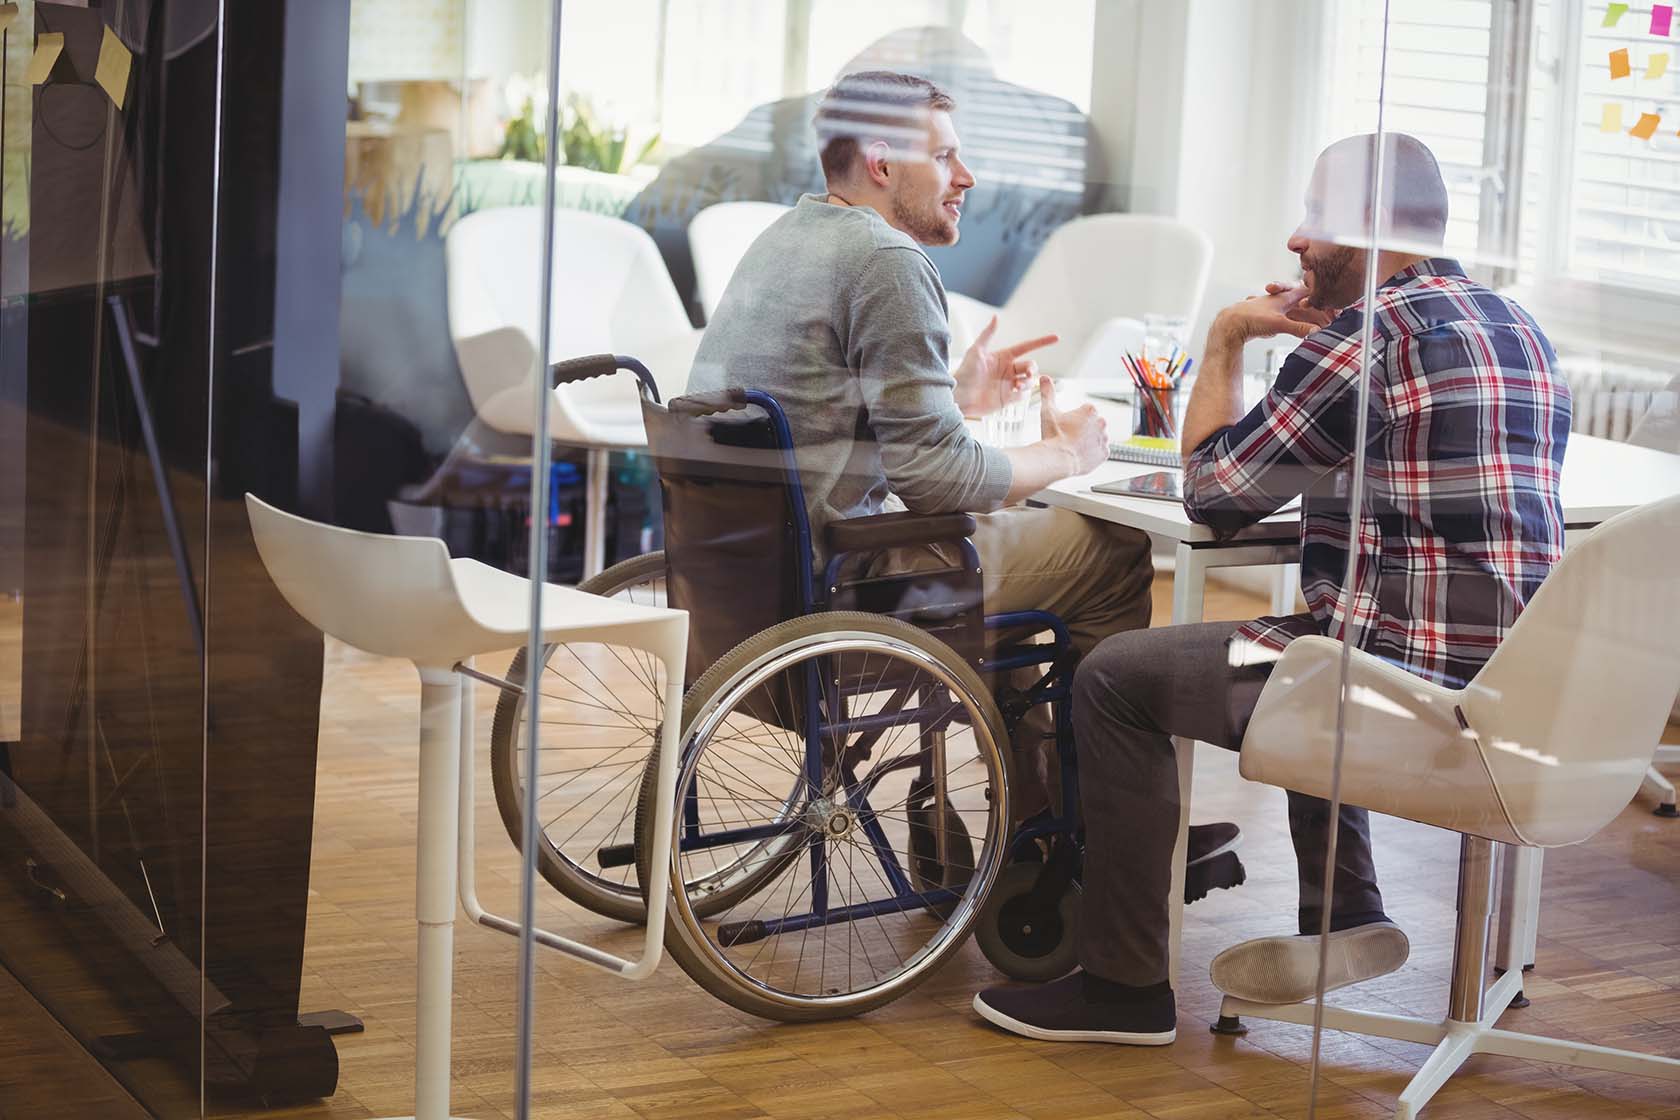 Man in a wheelchair talking to another man in a conference room